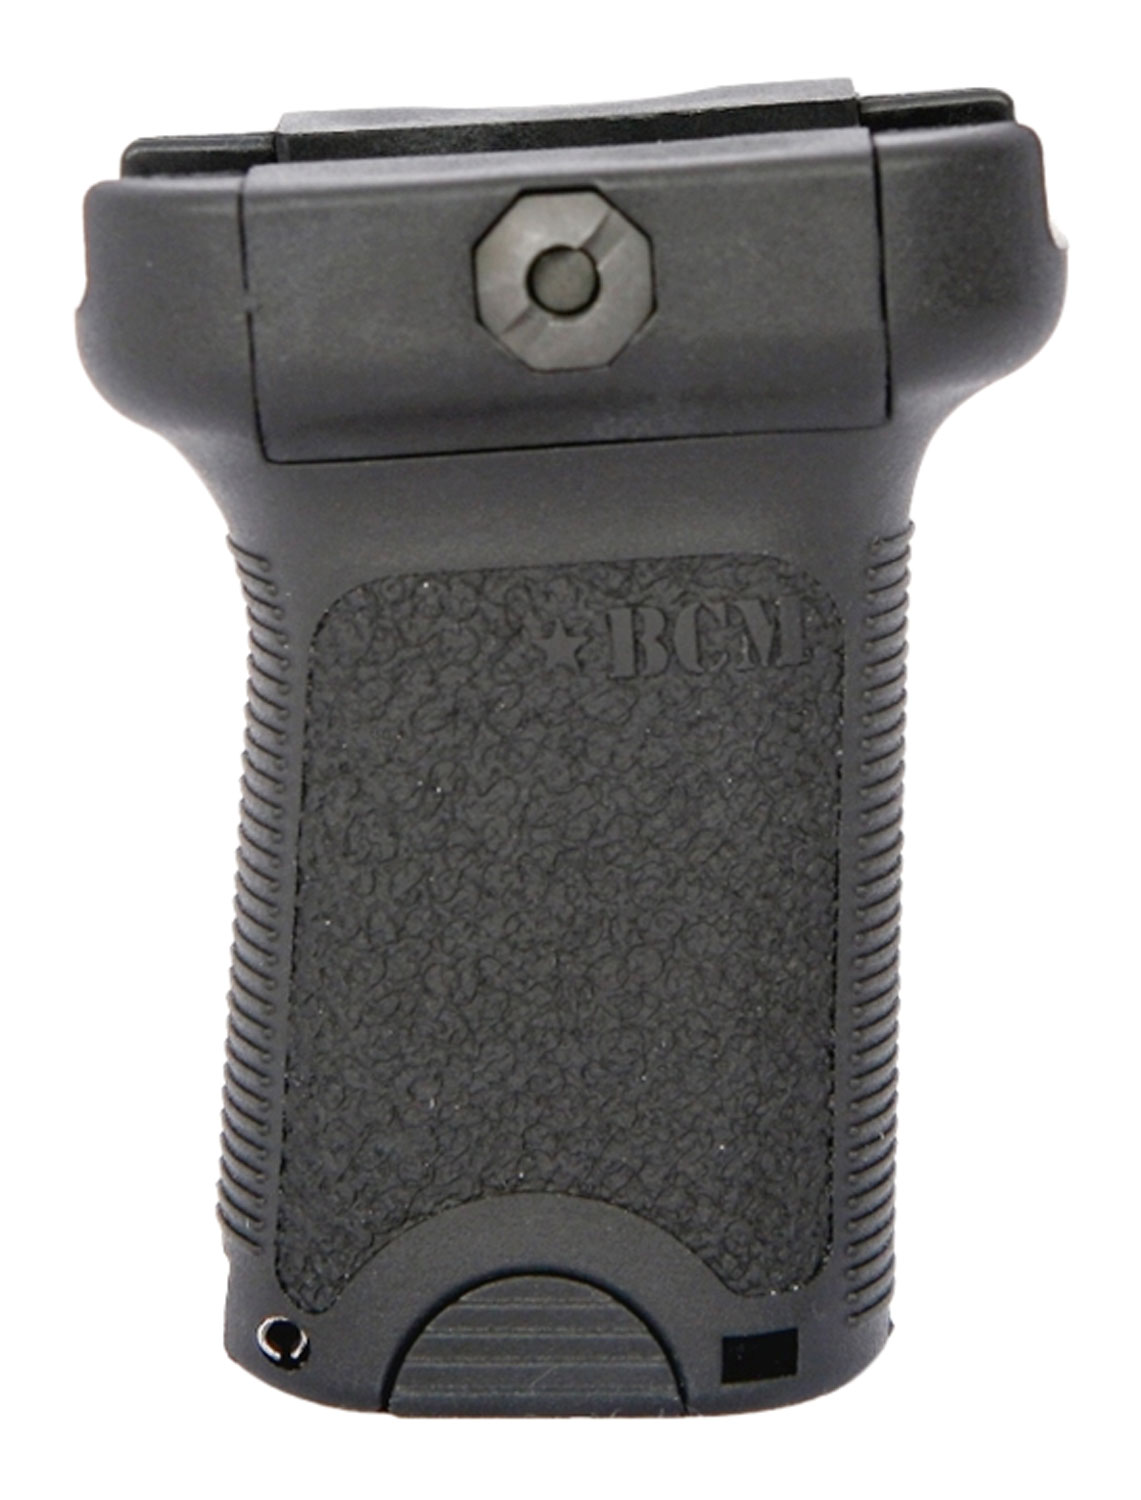 BCM VGSBLK BCMGunfighter Short Vertical Grip Made of Polymer With Black Aggressive Textured Finish with Storage Compartment for Picatinny Rail